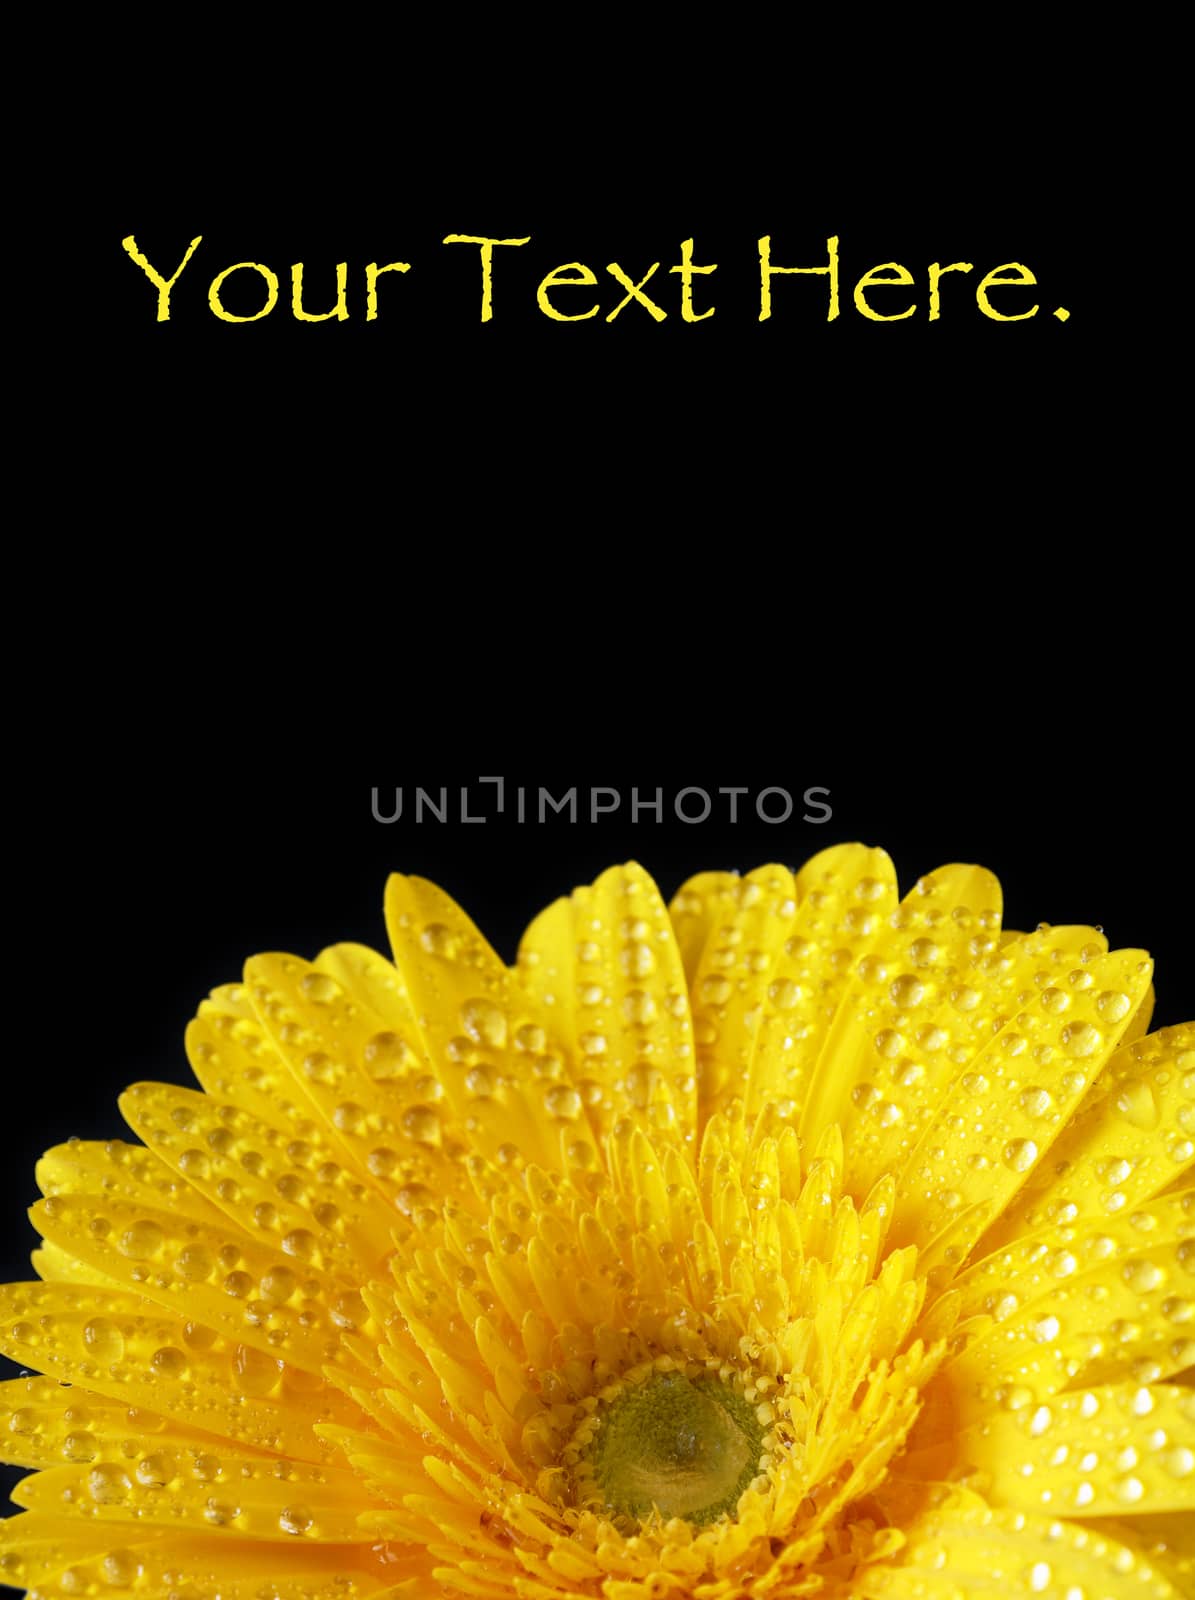 A beautiful closeup view of a vibrant yellow gerbera flower with dew water drops and a contrasting black background.